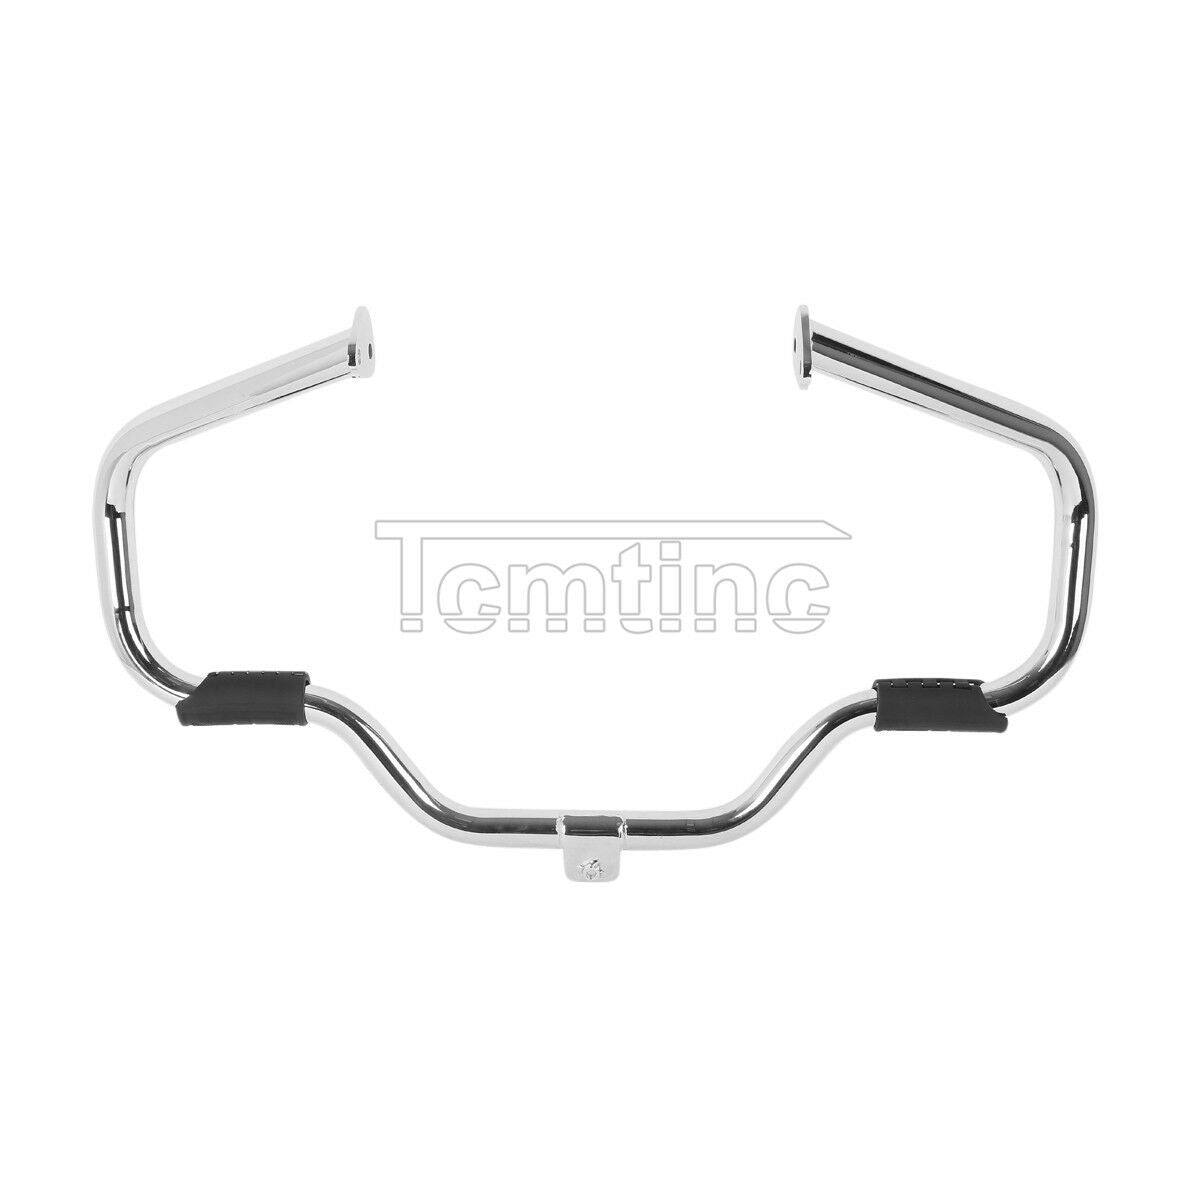 Chrome/Black Engine Highway Guard Crash Bar Fit For Harley Touring 1997-2008 07 - Moto Life Products